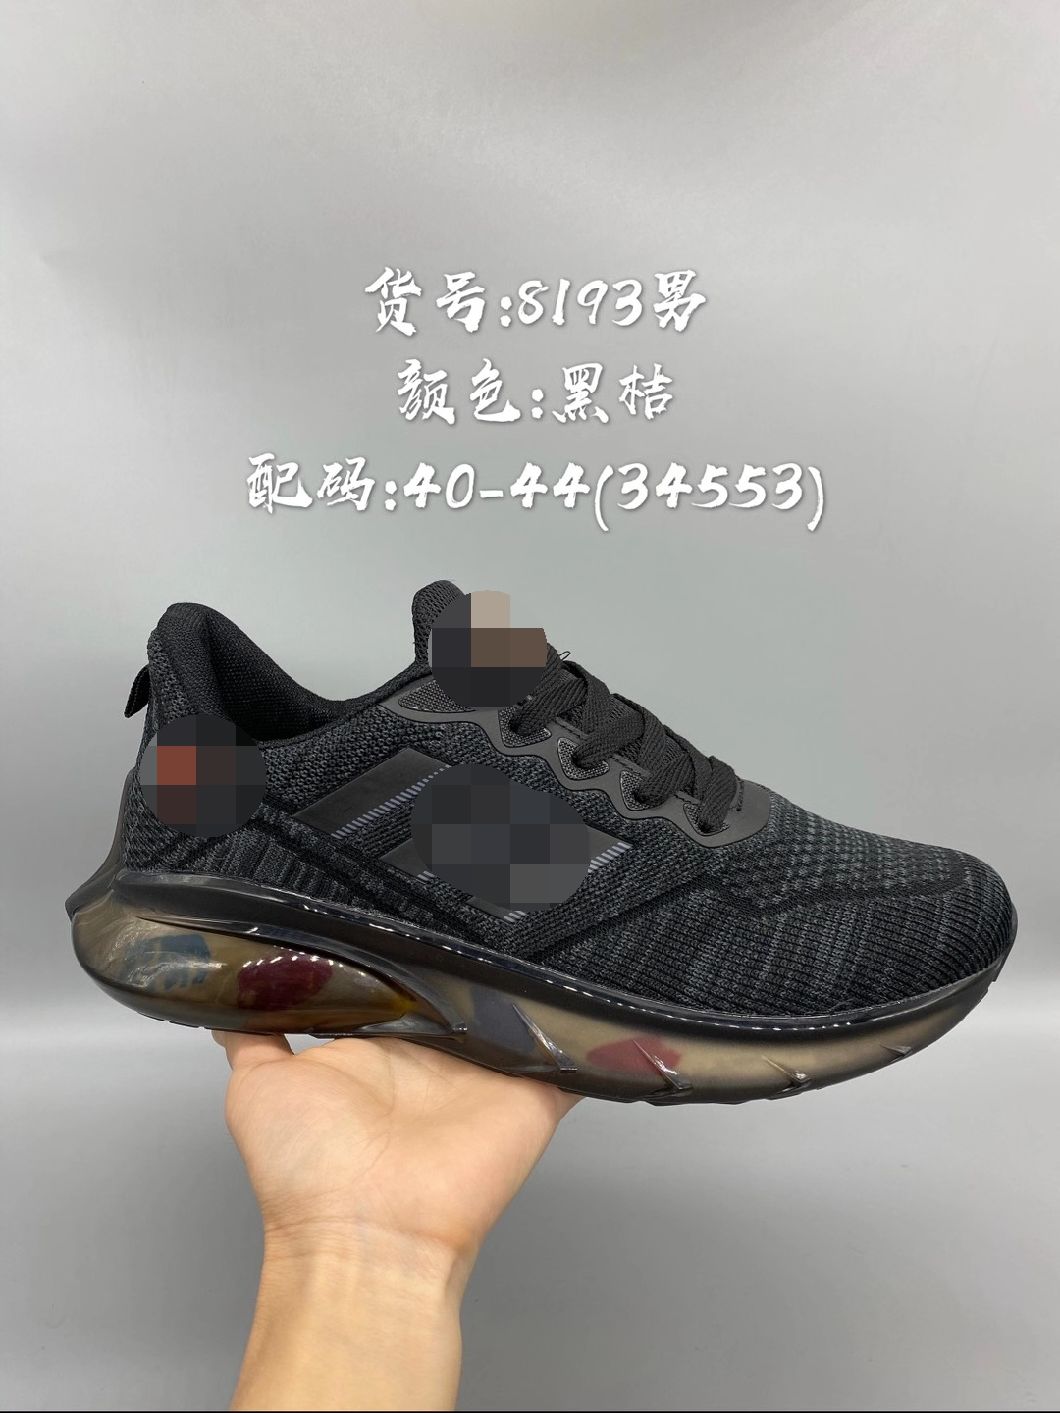 Hebei Shoes Factory Supply Low MOQ Stock Shoes Order Men Sport Shoes